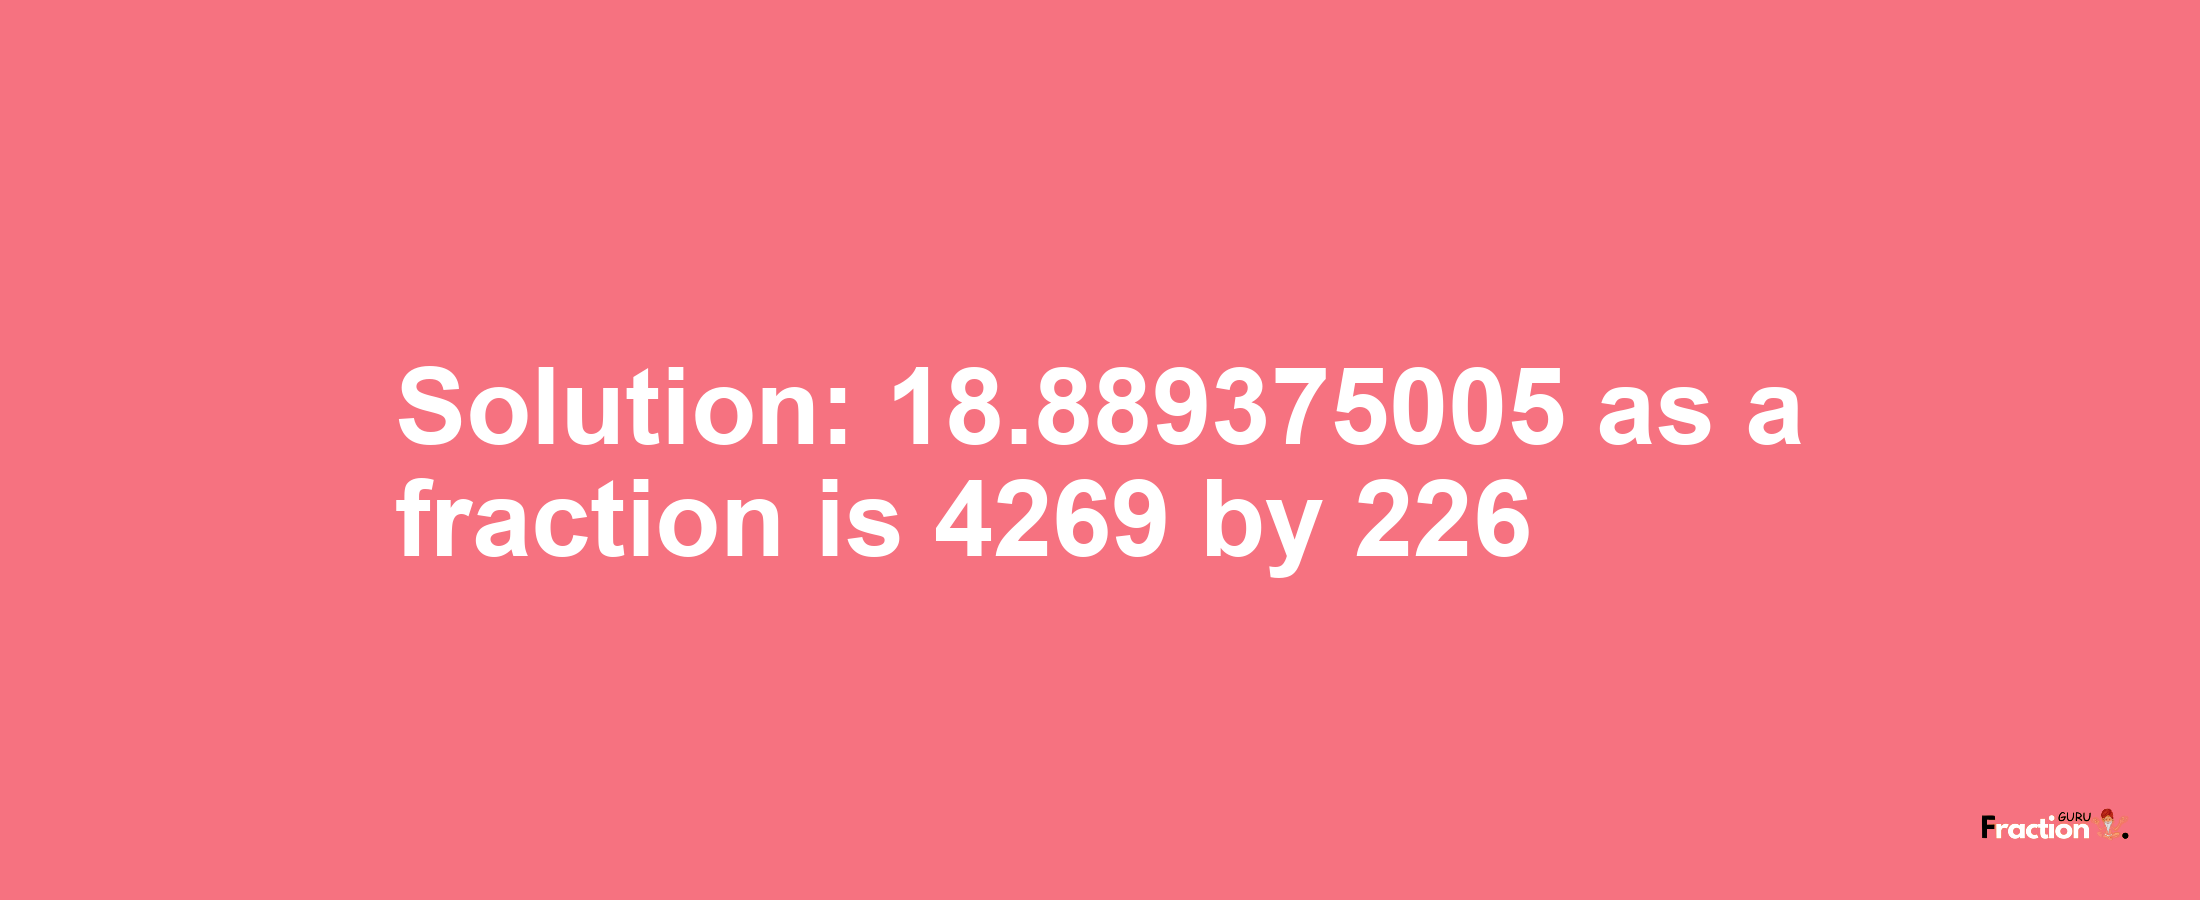 Solution:18.889375005 as a fraction is 4269/226